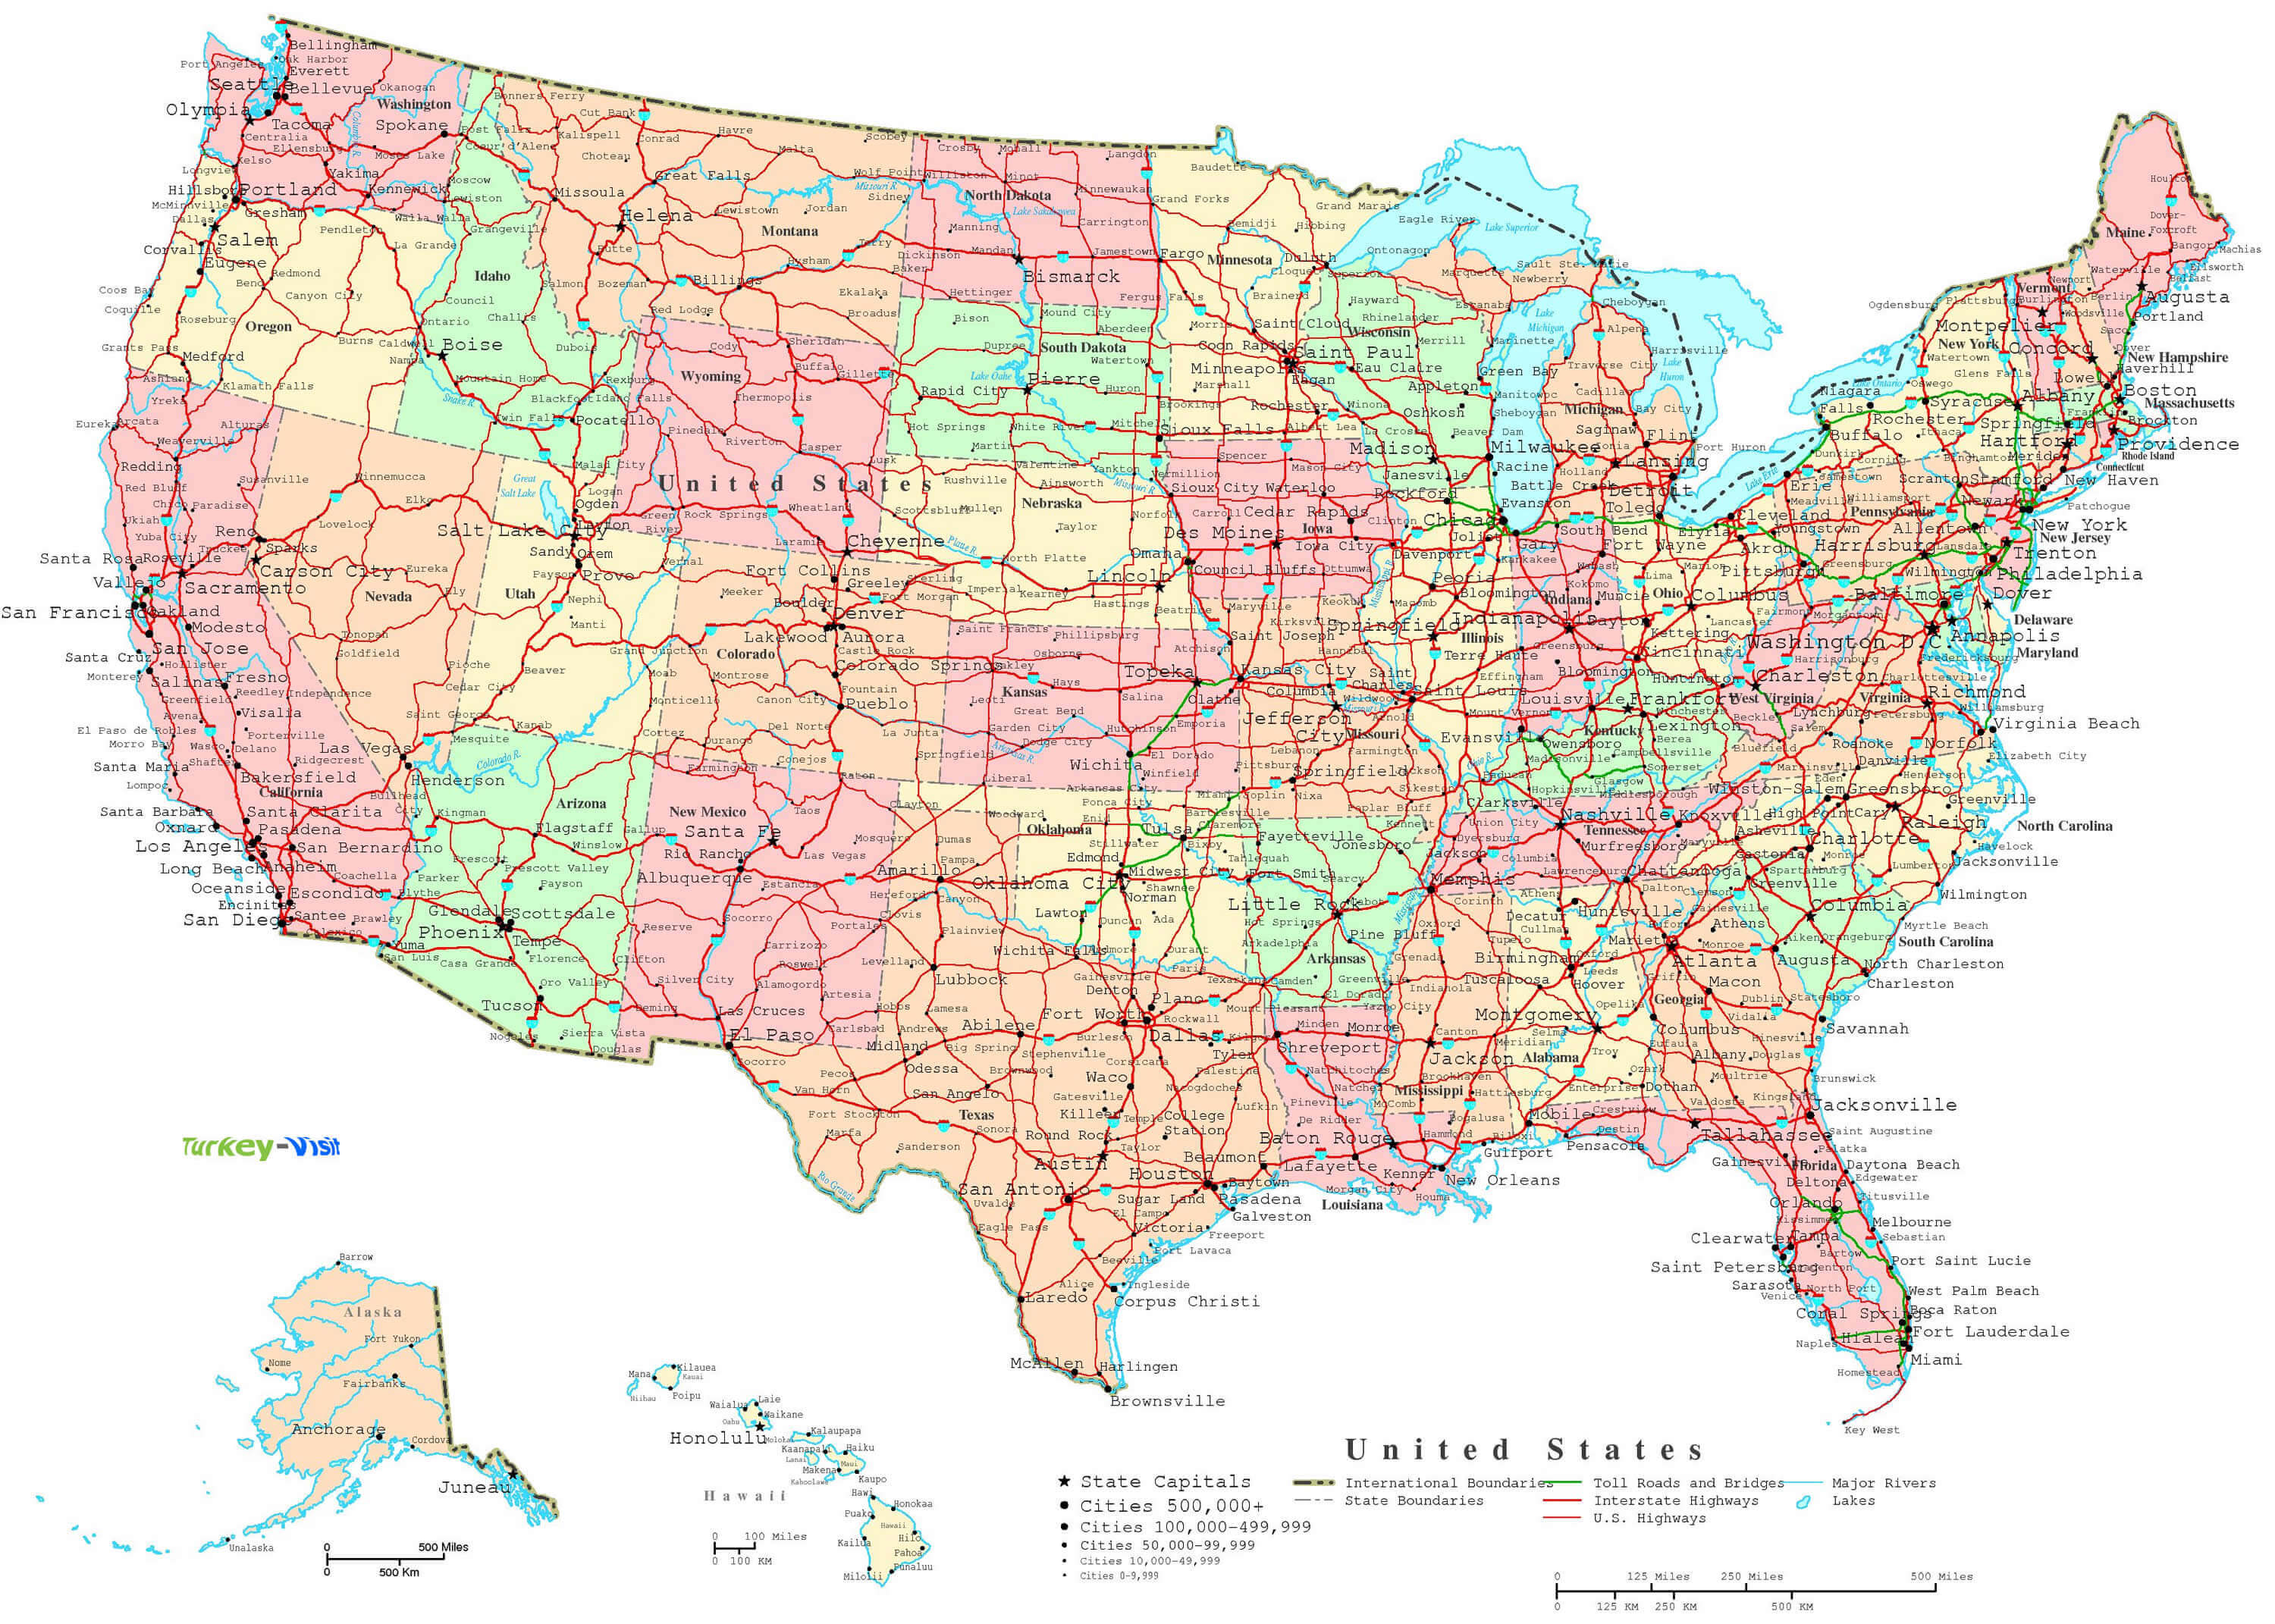 United States Large Cities Maps